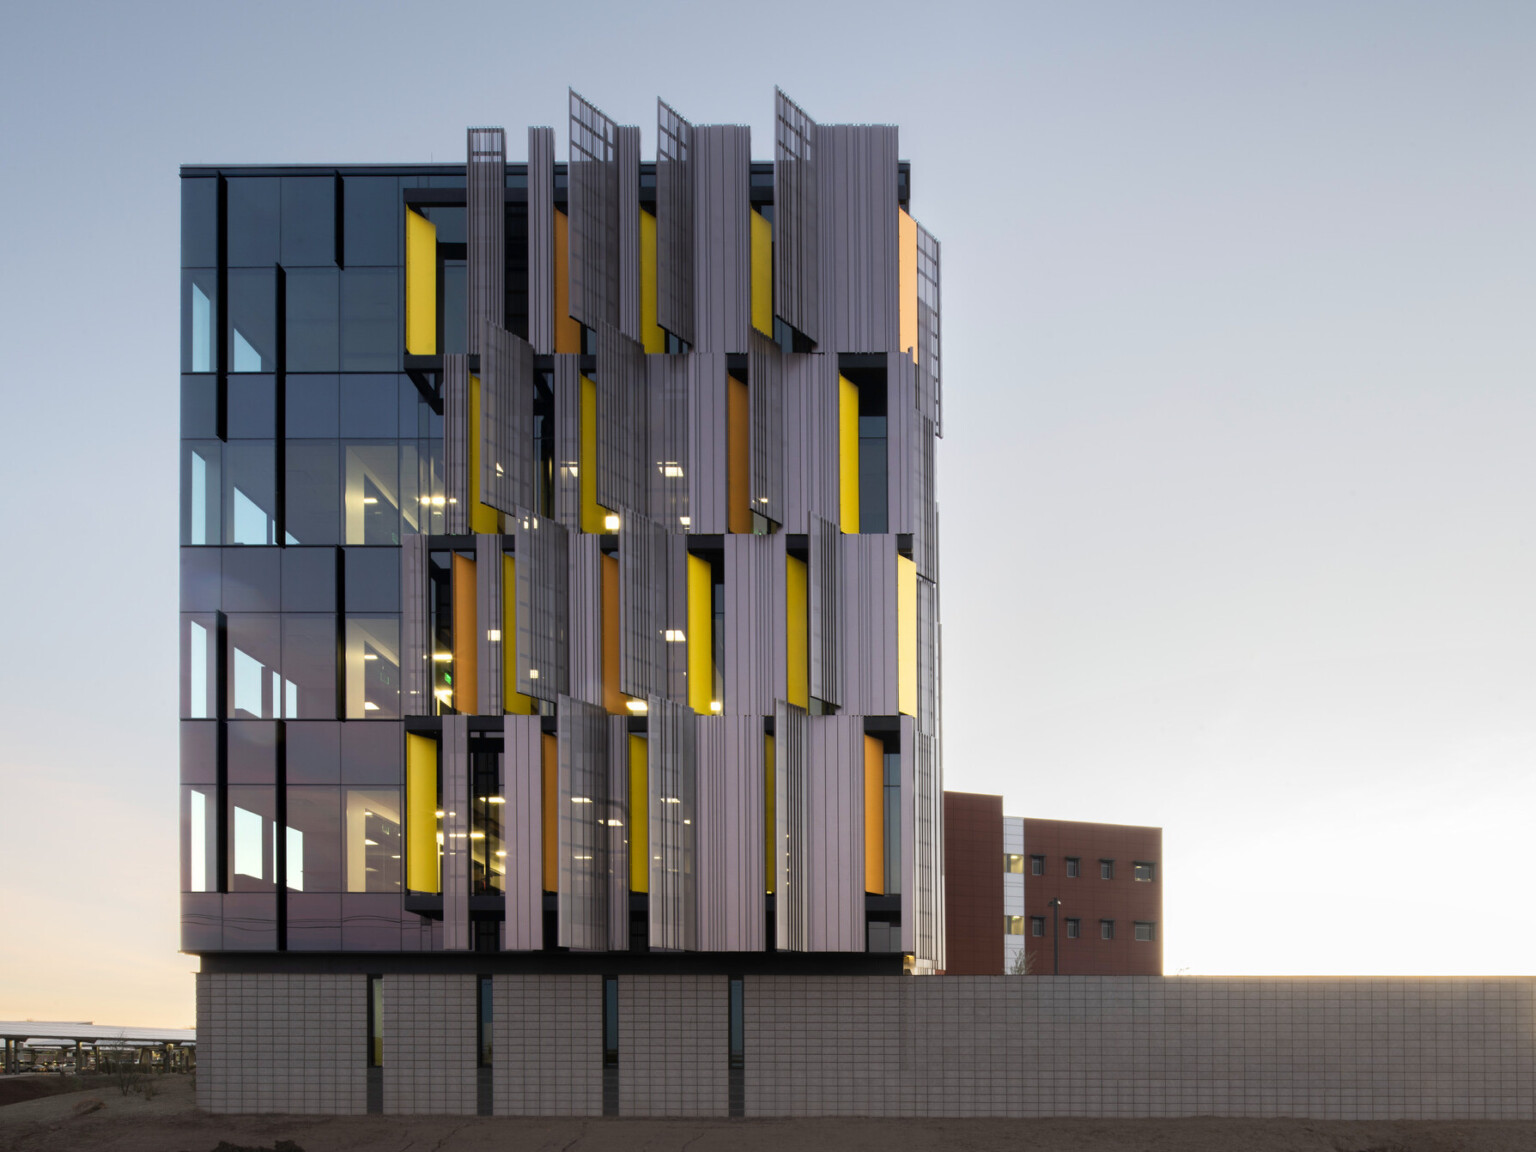 side view of courthouse with serrated sunscreen facade, a pattern of yellow panels peaking between. Floor to ceiling windows